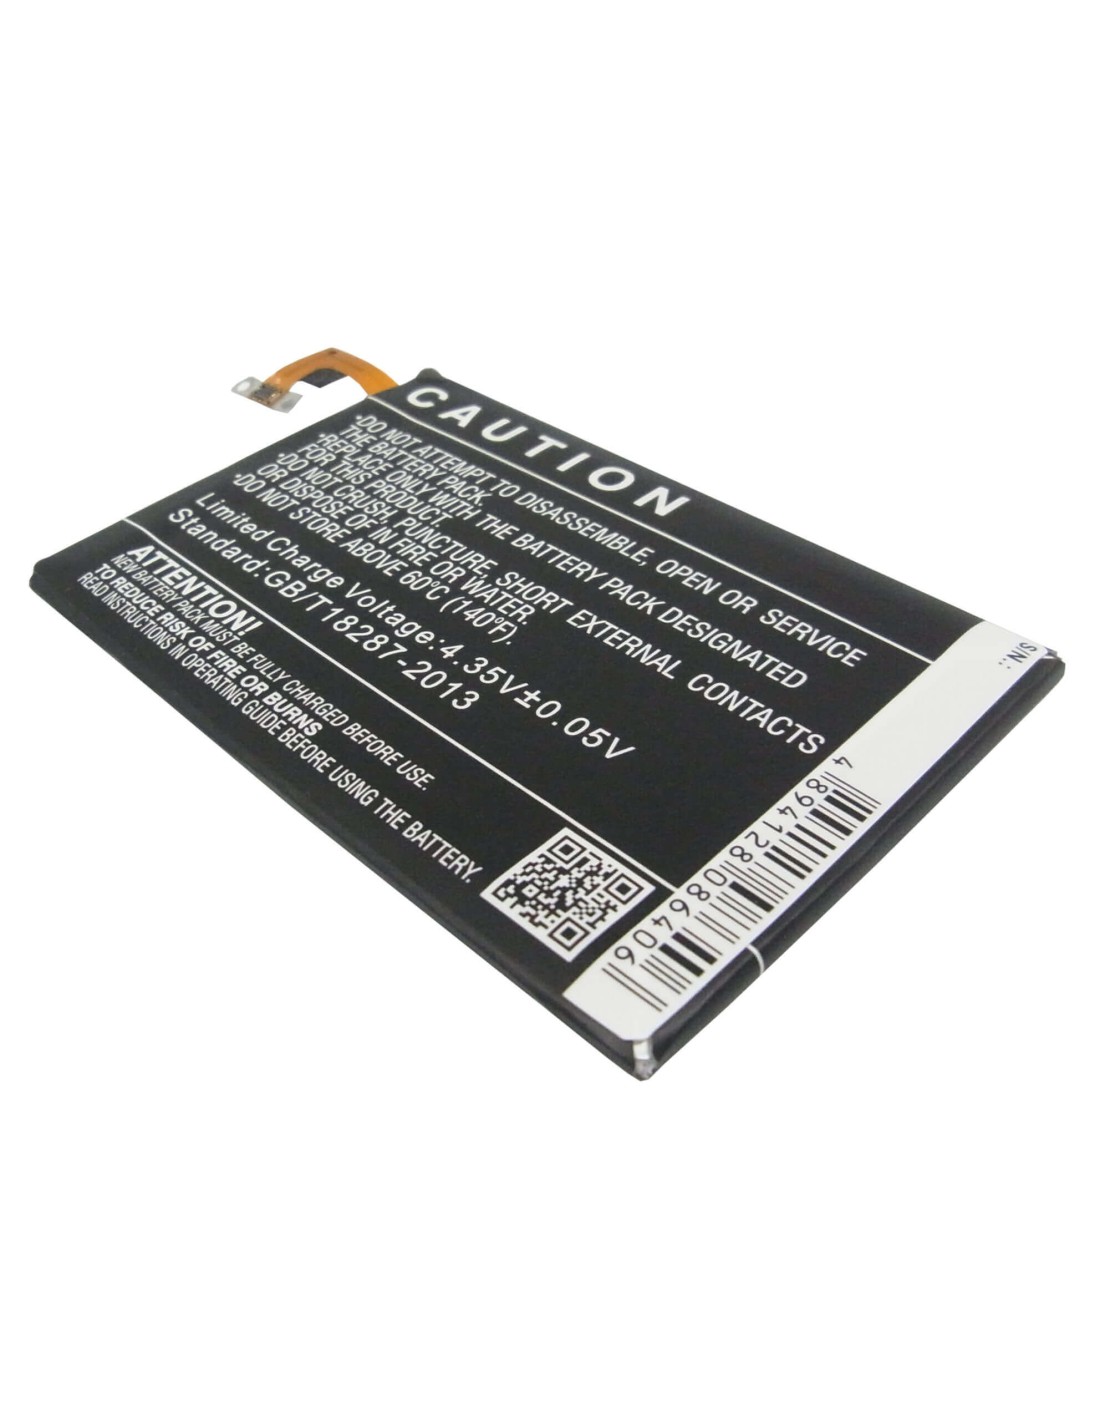 Battery for HTC M8, M8x, One Max 3.8V, 2600mAh - 9.88Wh